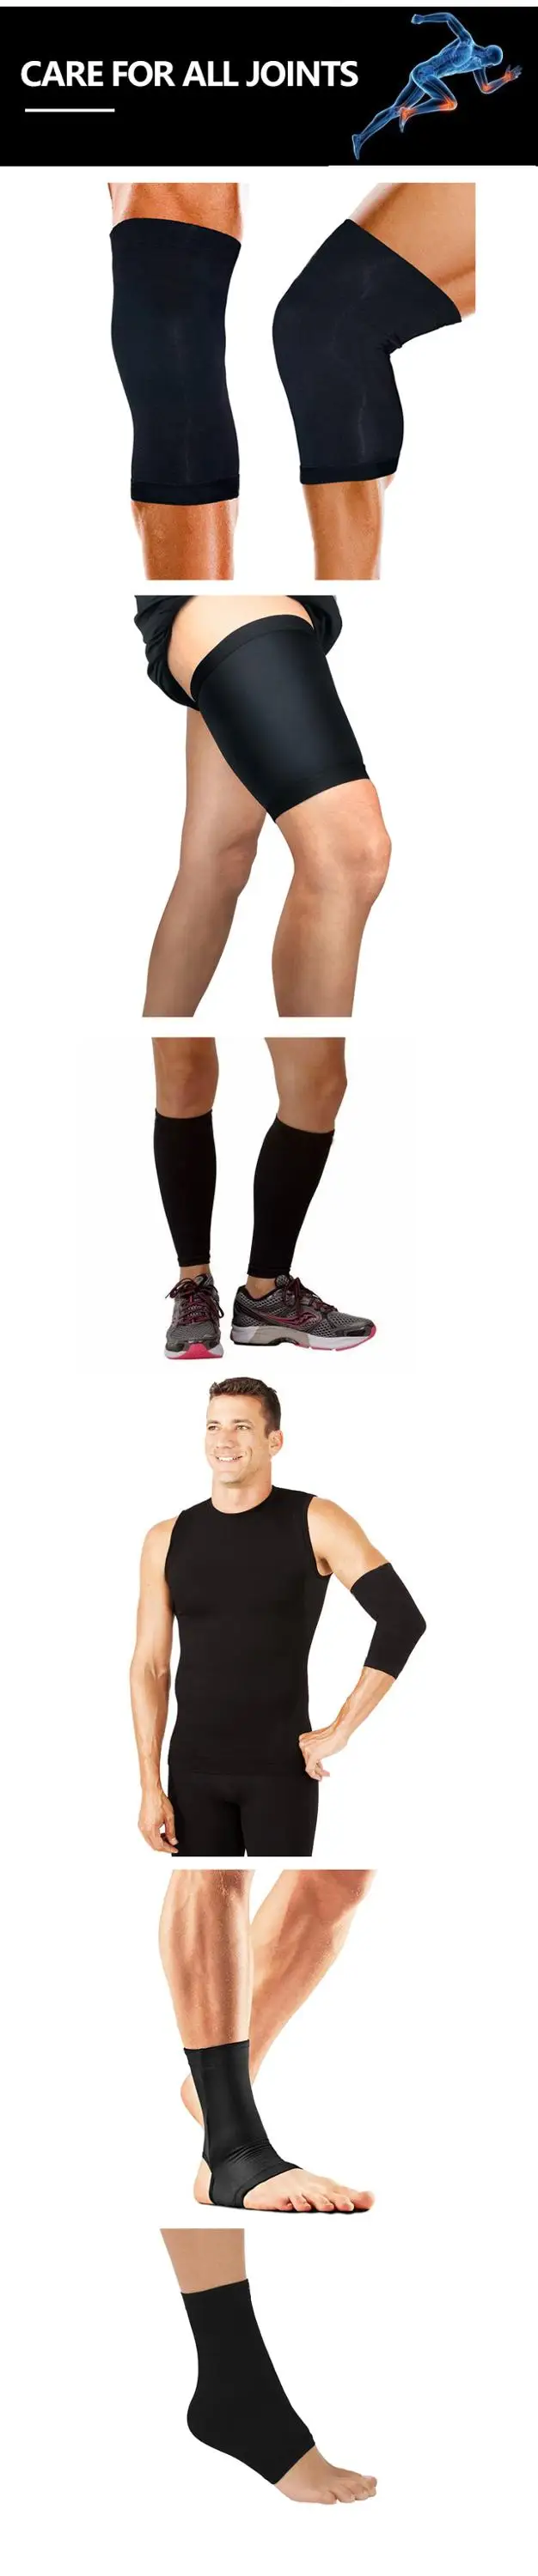 copperjoint compression knee sleeve for sports wear